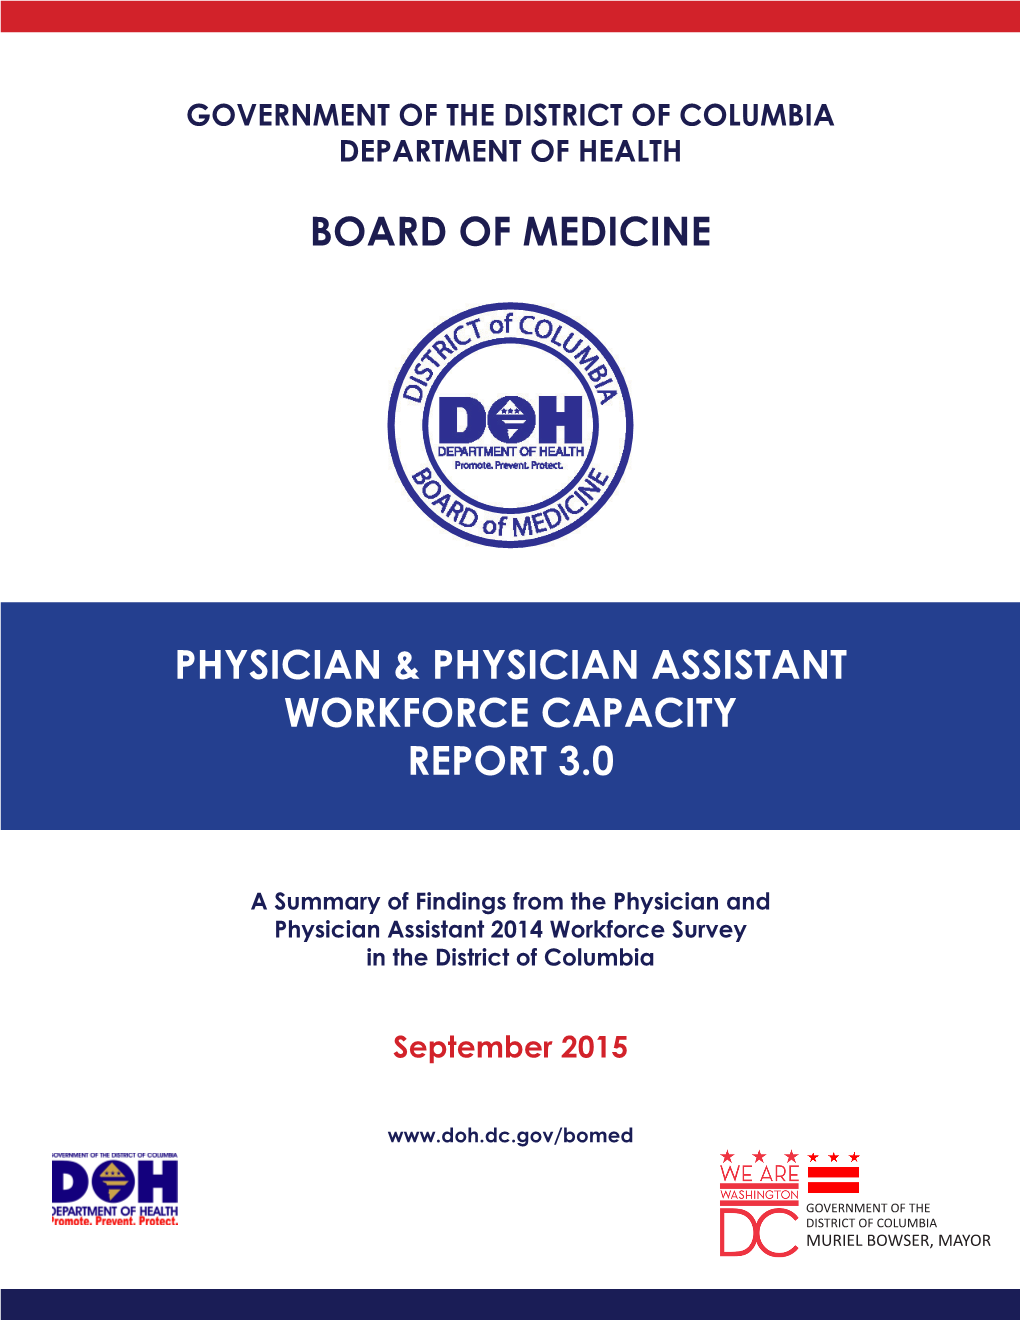 Physician & Physician Assistant Workforce Capacity Report